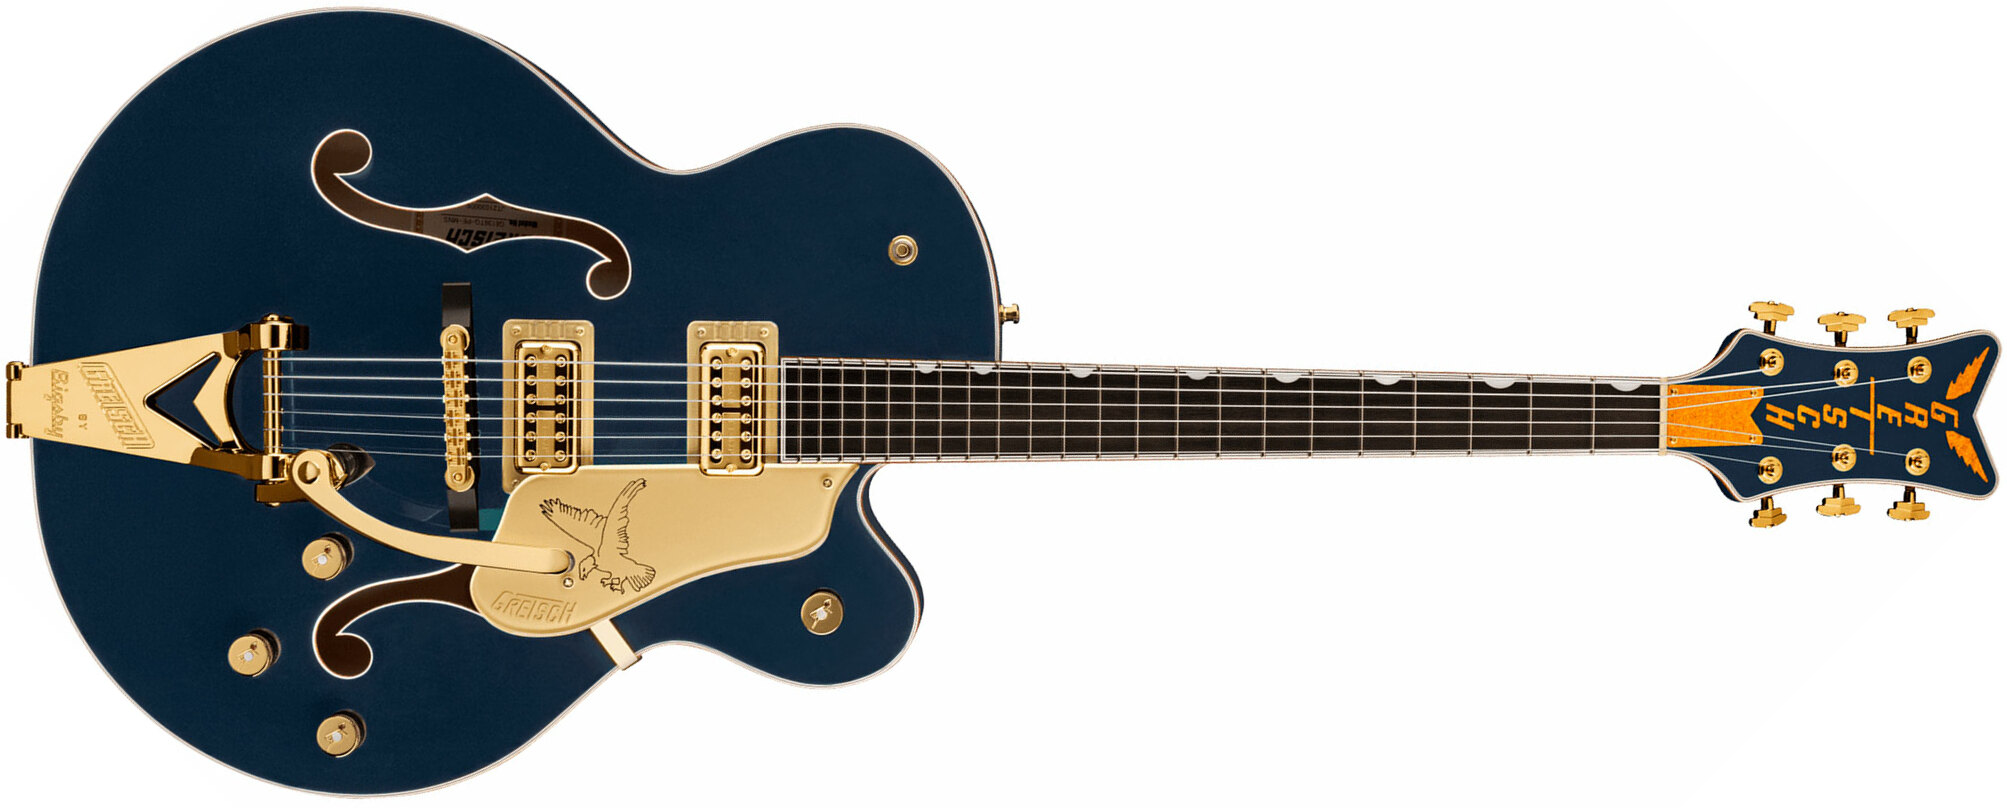 Gretsch G6136tg Players Edition Falcon Hollow Body Pro Jap Hh Trem Eb - Midnight Sapphire - Hollow-body electric guitar - Main picture